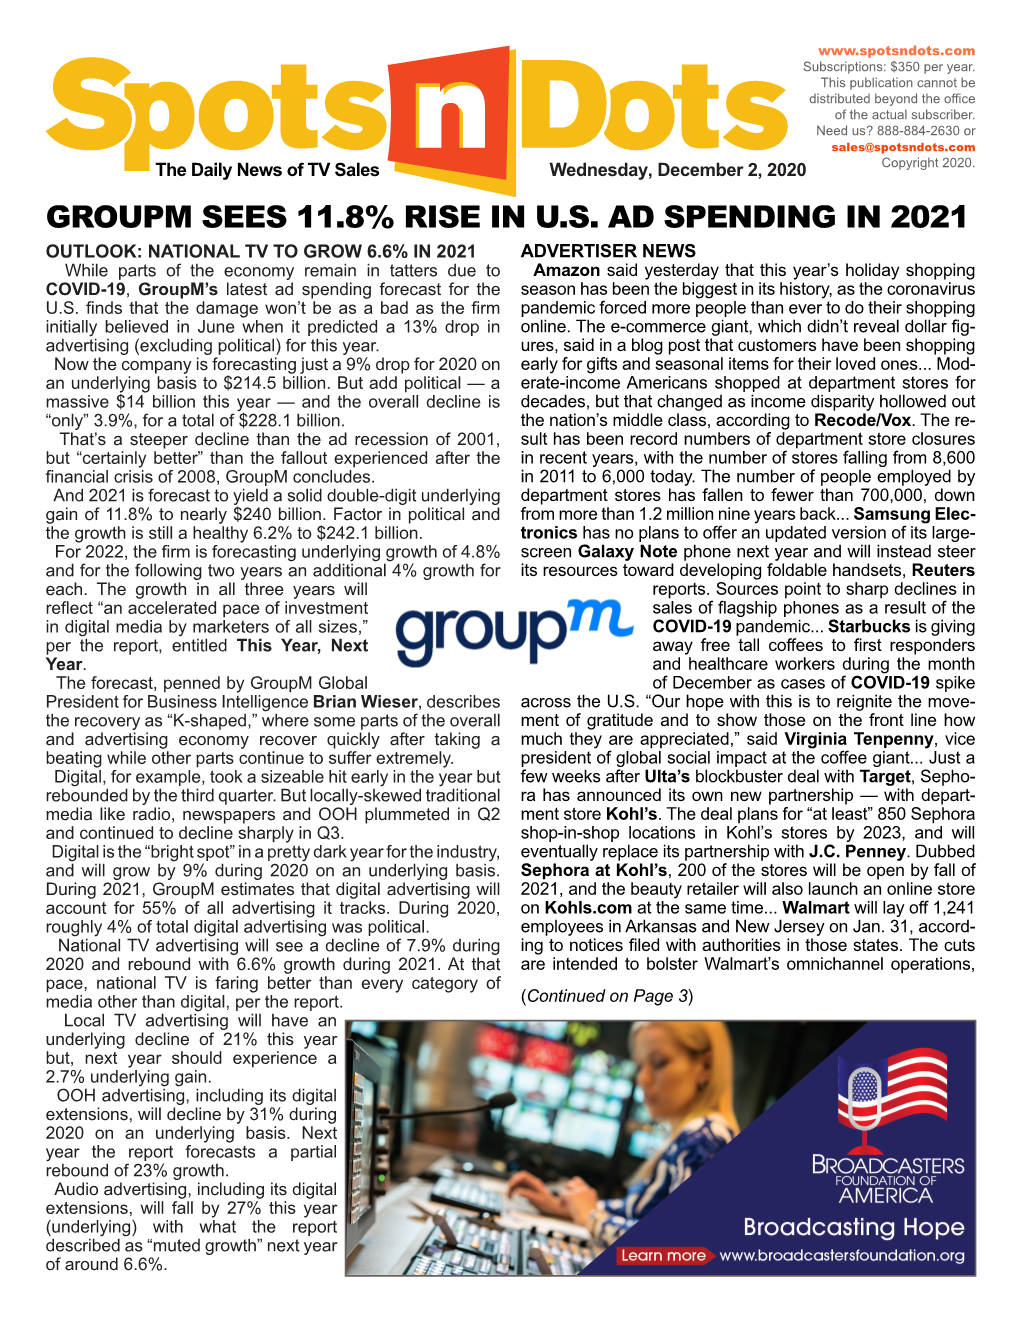 Groupm Sees 11.8% Rise in U.S. Ad Spending in 2021